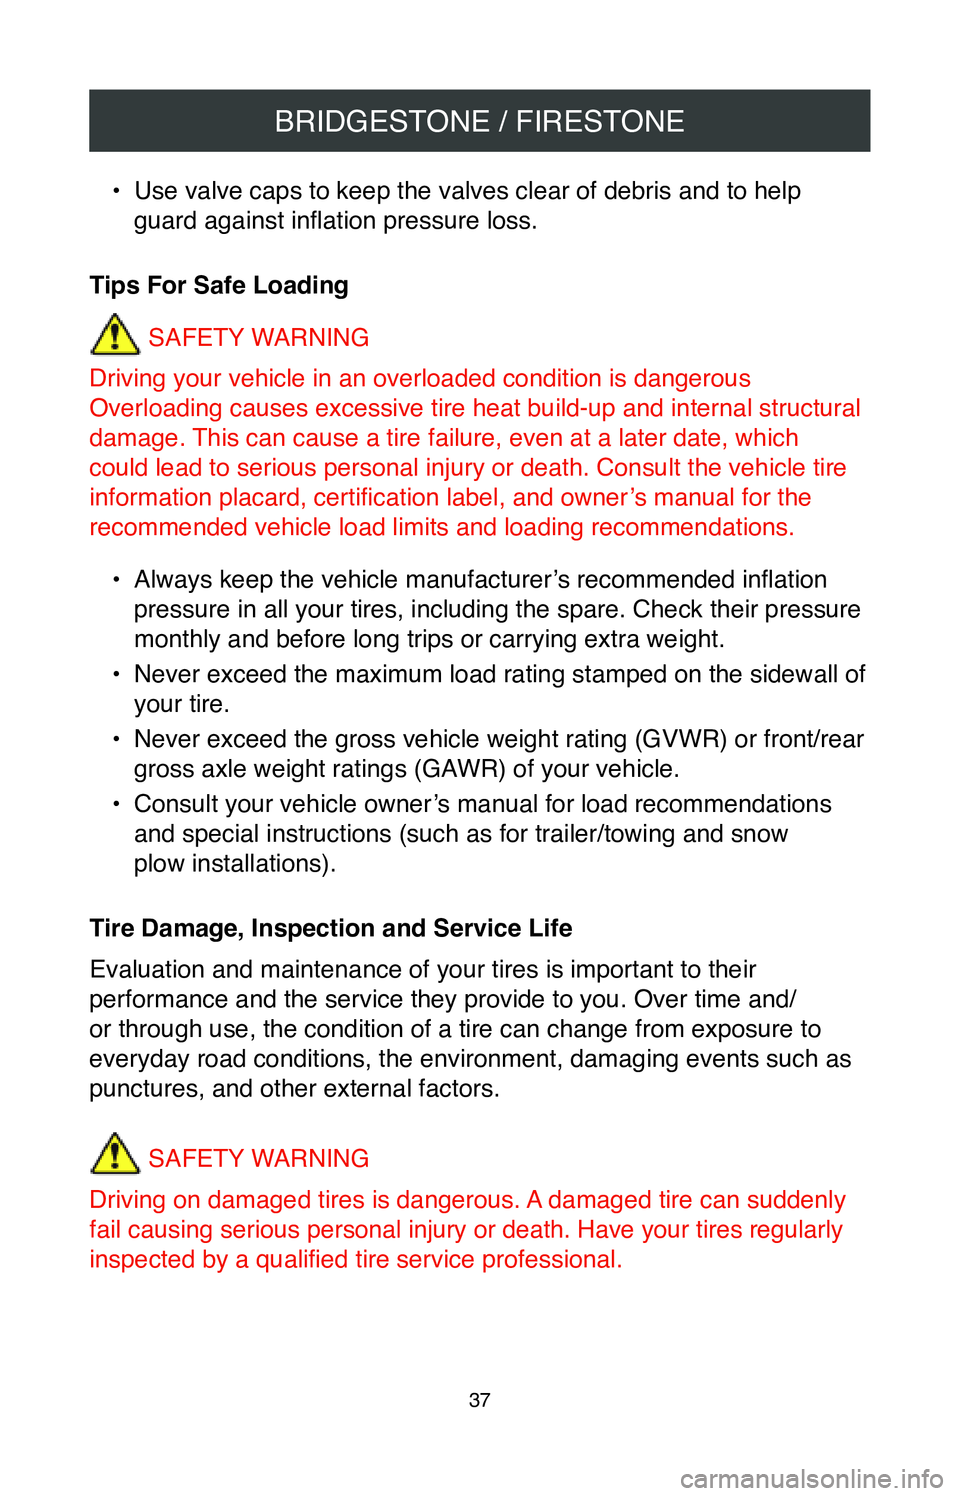 TOYOTA CAMRY 2020  Warranties & Maintenance Guides (in English) BRIDGESTONE / FIRESTONE
37
• Use valve caps to keep the valves clear of debris and to help 
guard against inflation pressure loss.
Tips For Safe Loading SAFETY WARNING
Driving your vehicle in an ove